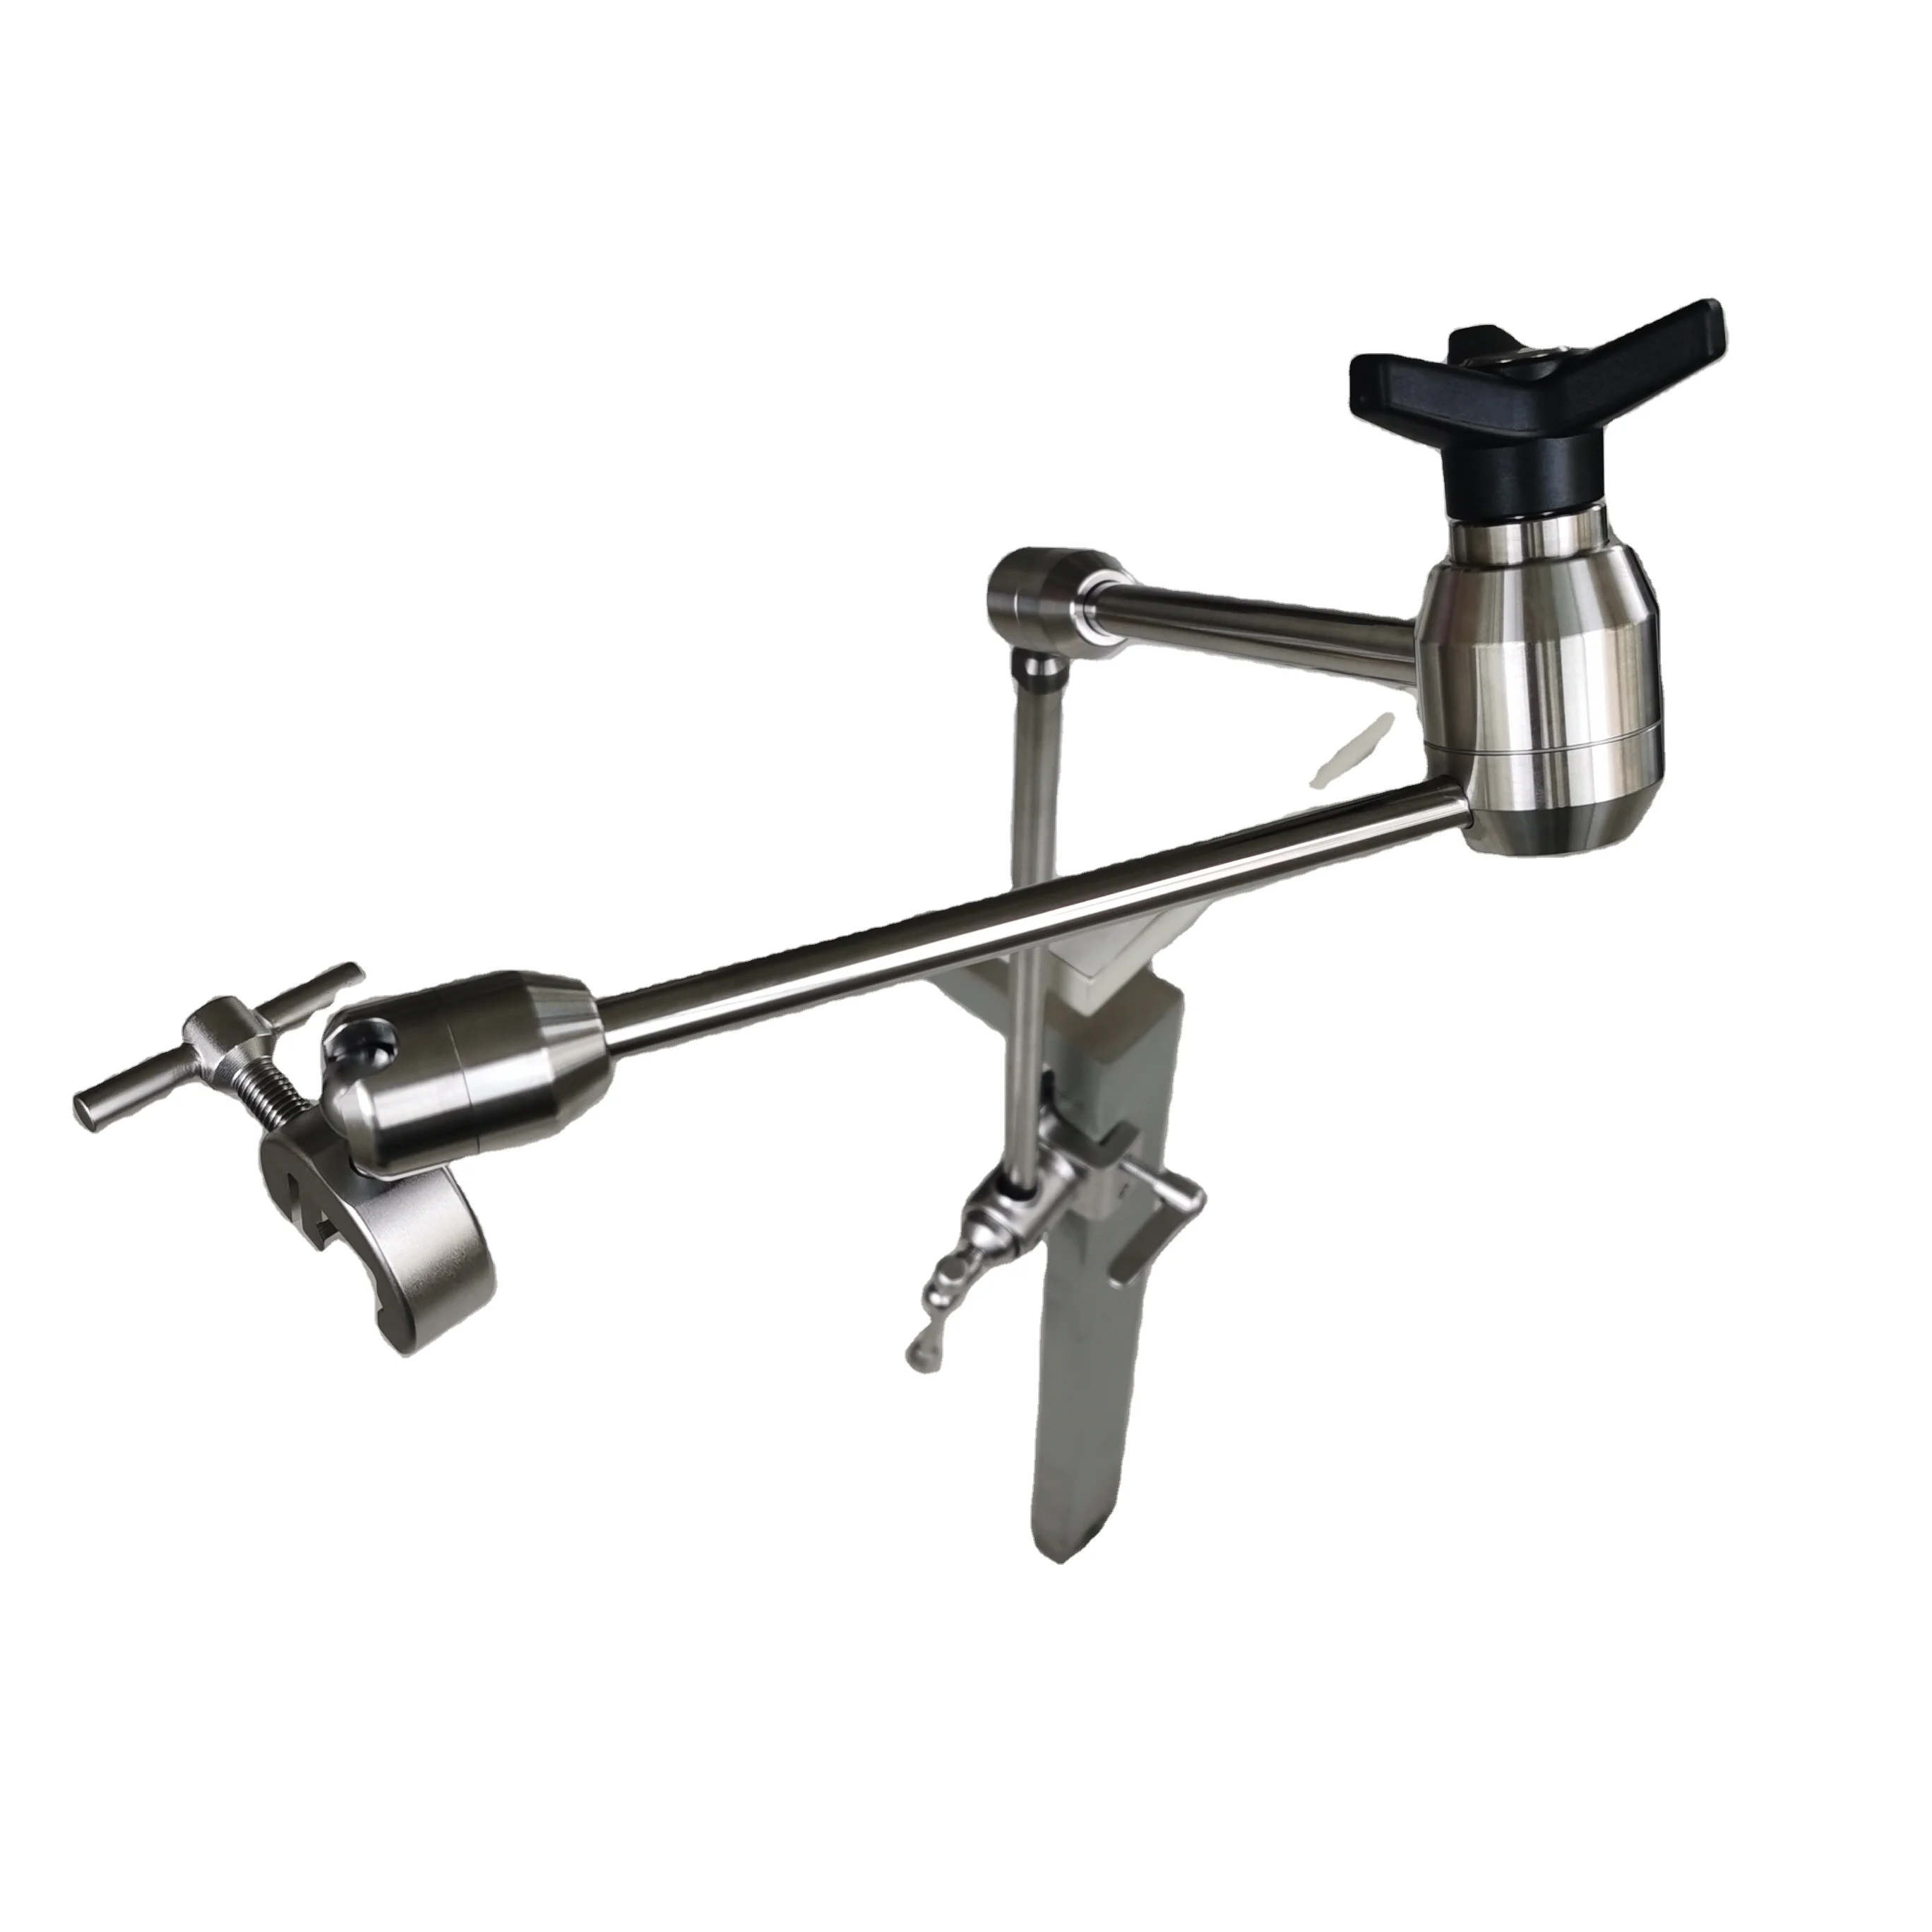 

Endoscopic Discectomy system free arm scope holder stainless steel hoder Martin arm retractor